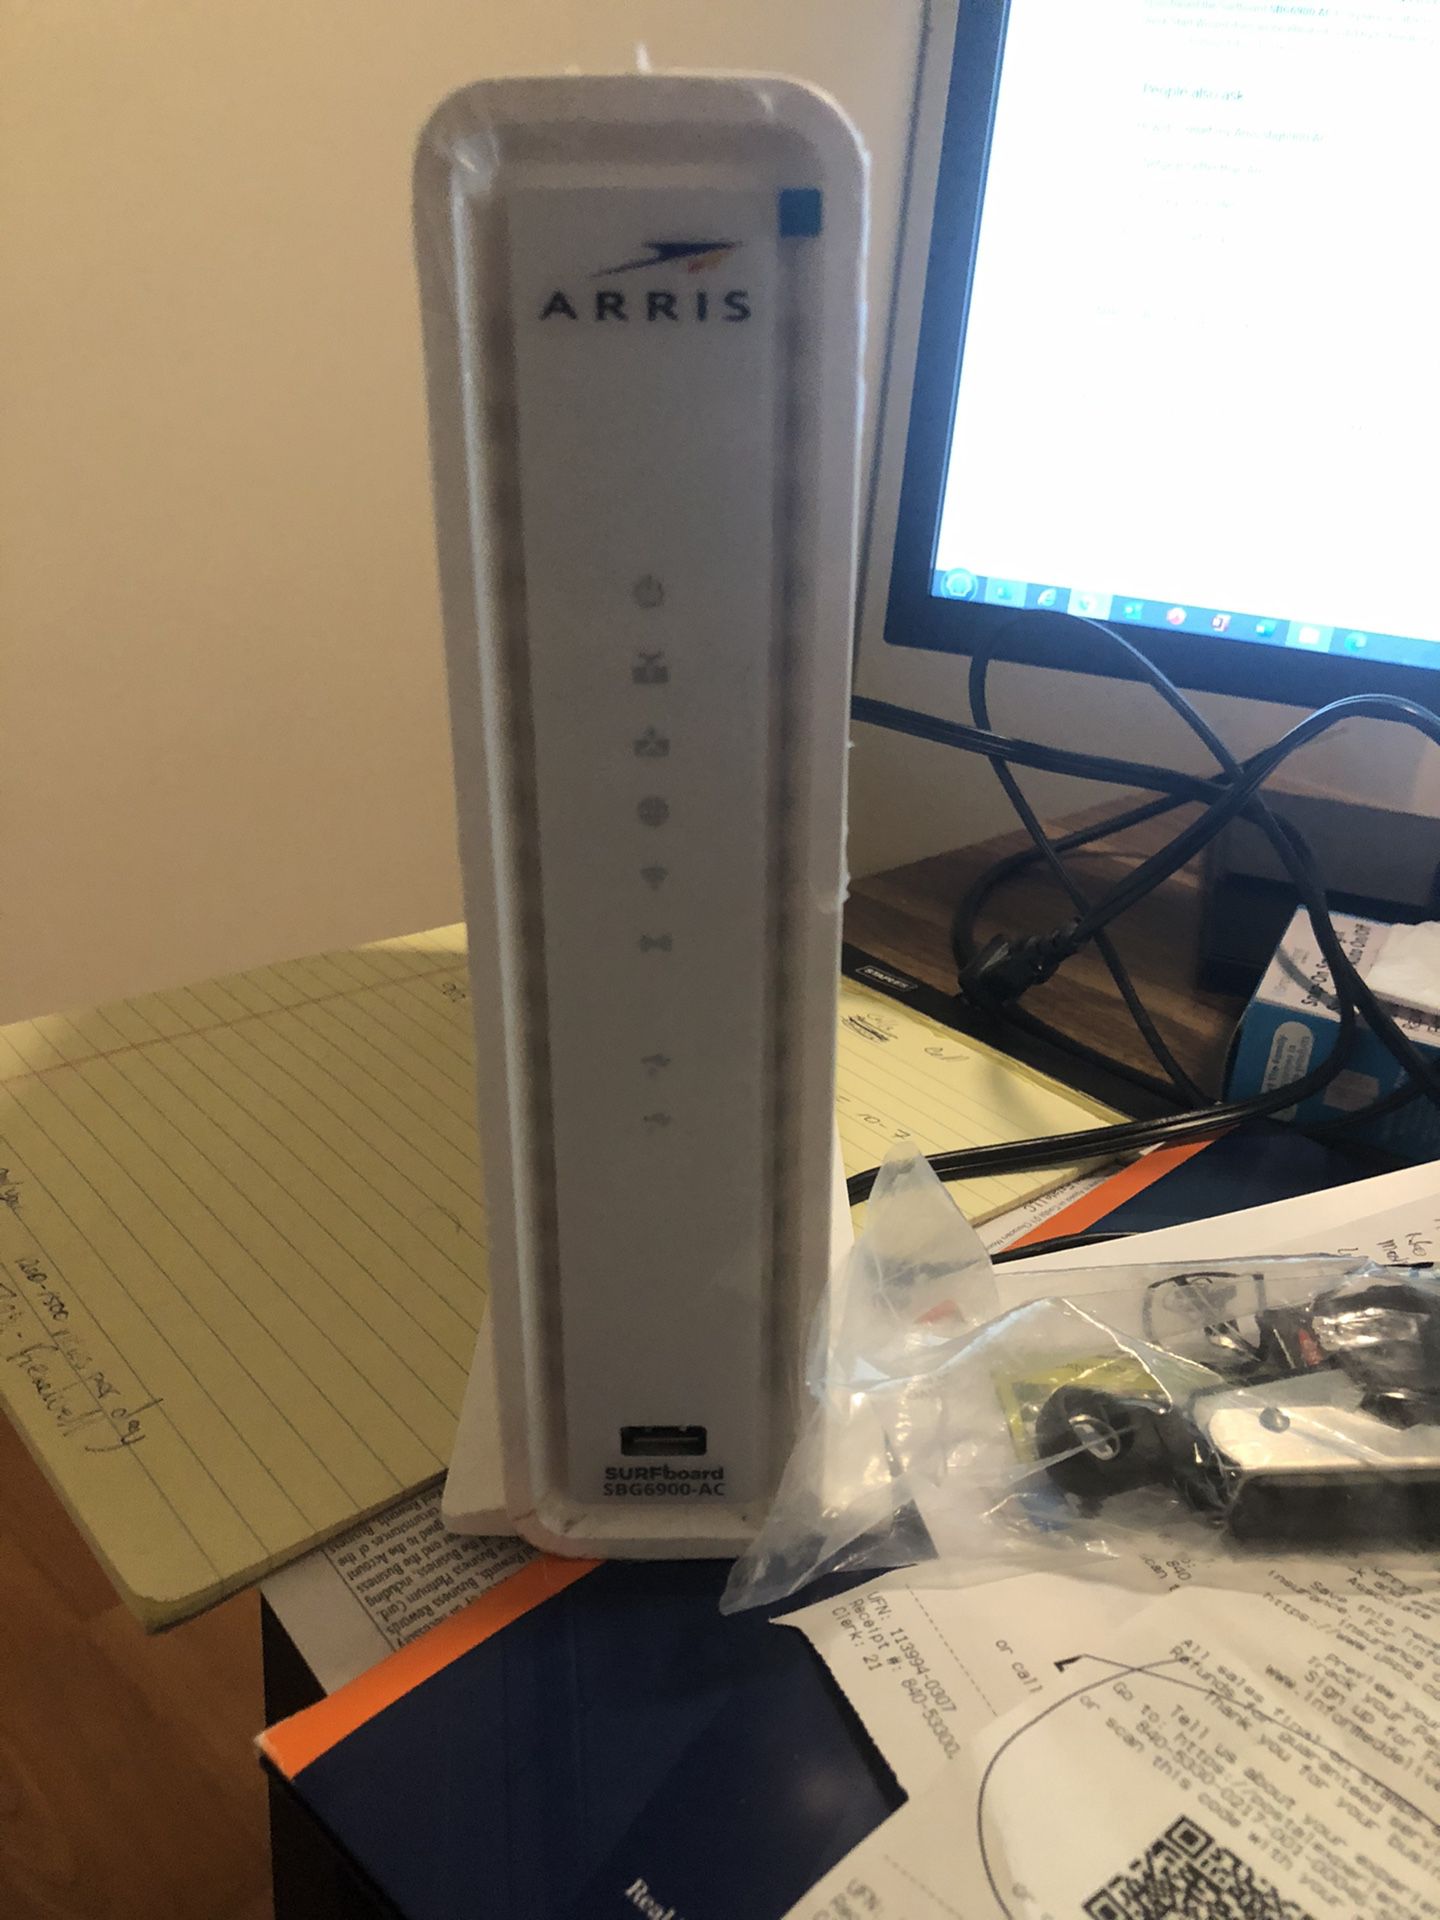 Arris Surfboard SBG6900-AC and WiFi Router